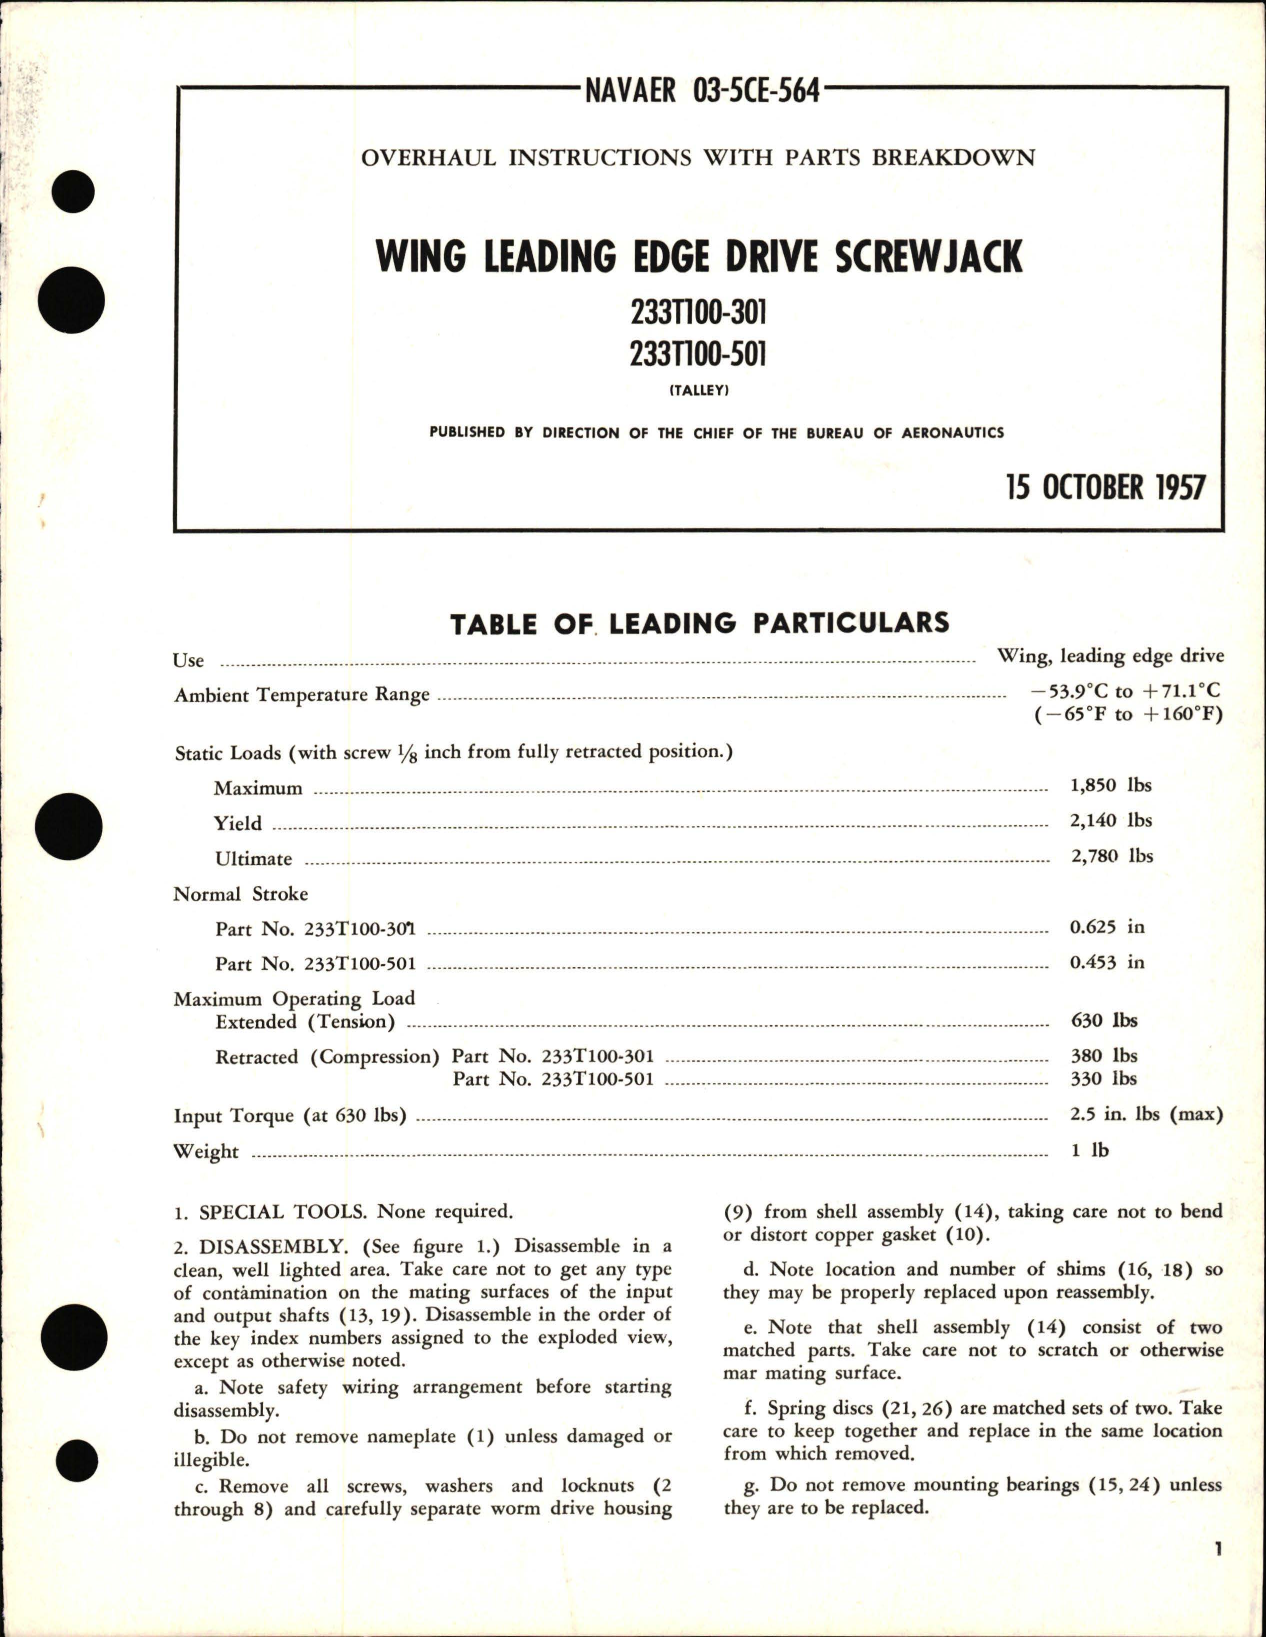 Sample page 1 from AirCorps Library document: Overhaul Instructions with Parts Breakdown for Wing Leading Edge Drive Screwjack 233T100-301 and 233T100-501